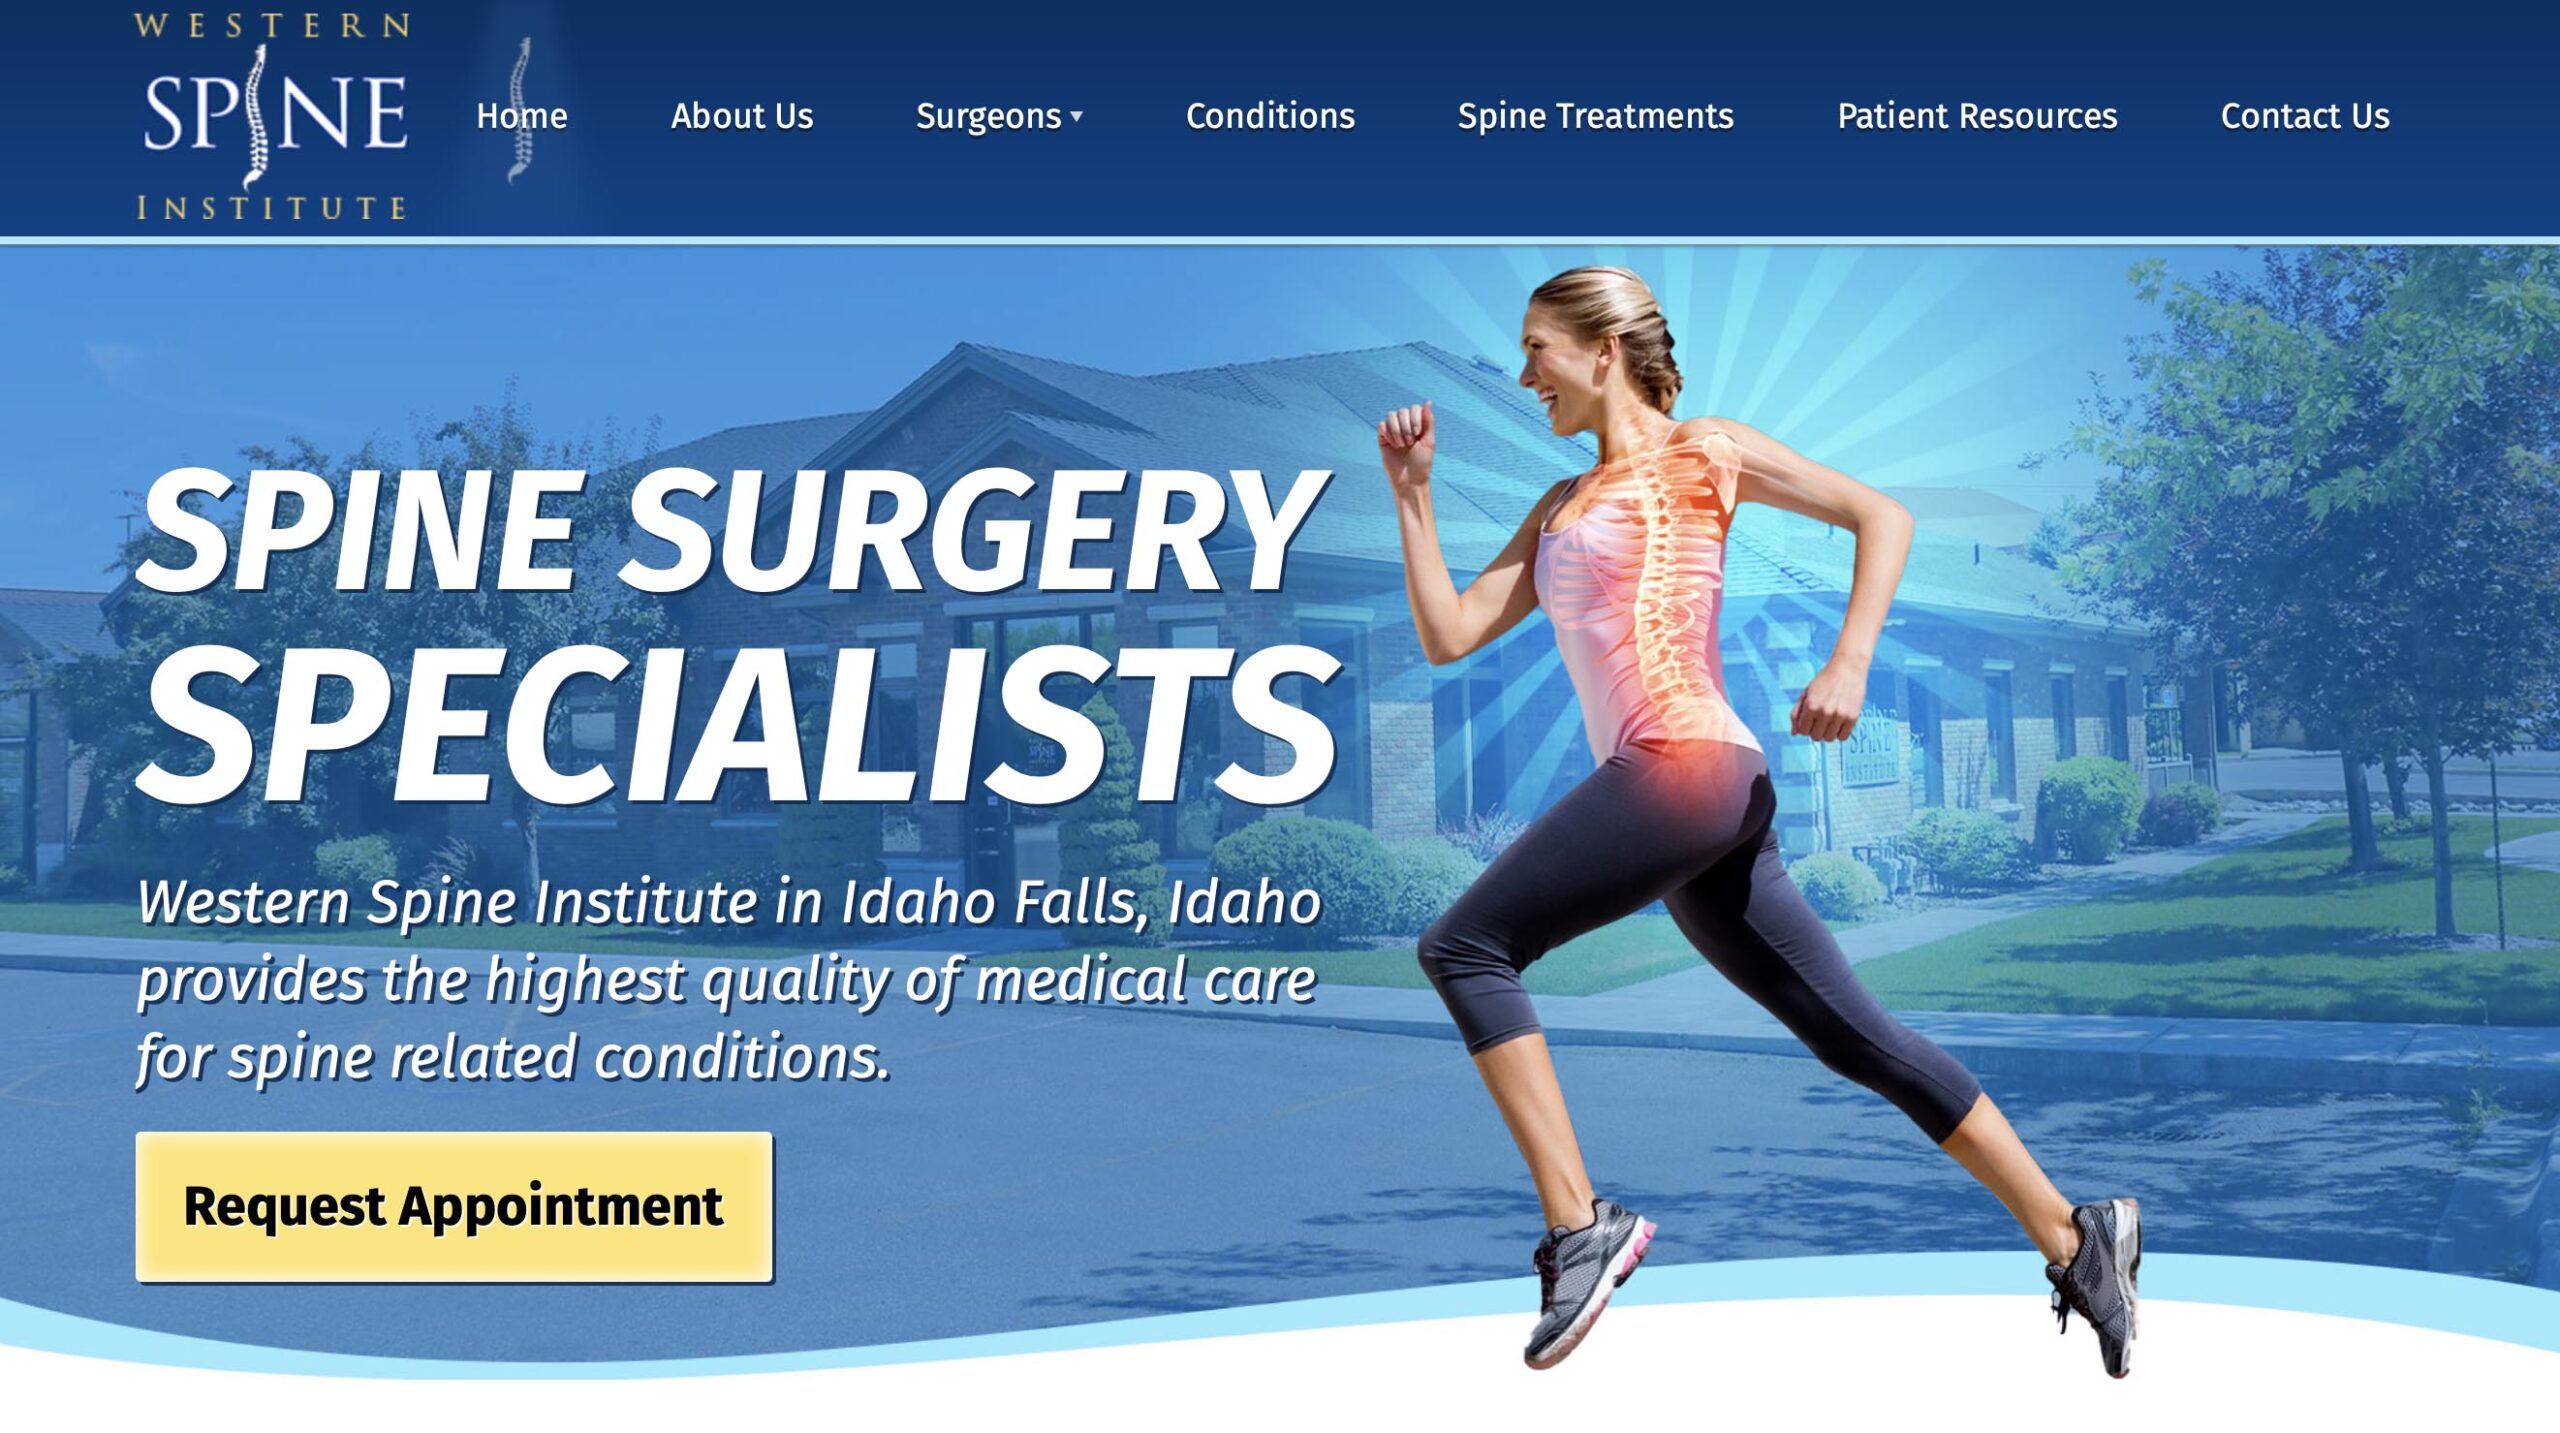 Marketing Agancy - Marketing consultant and website developer for Western Spine Institute in Idaho Falls.